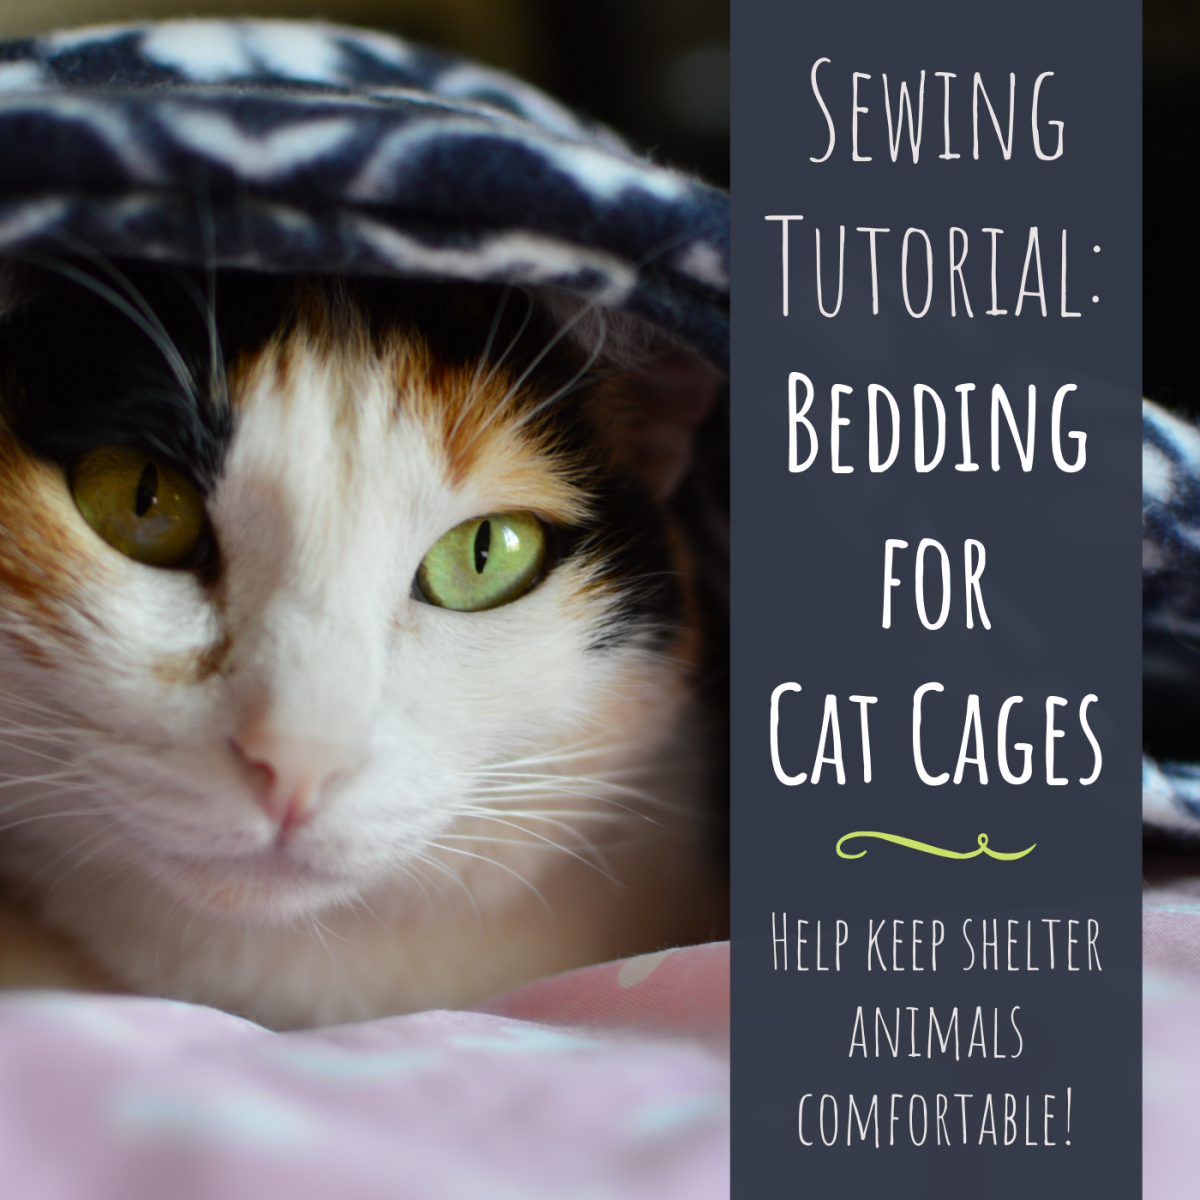 How to Make Cage Mats or Kennel Pads for Cats